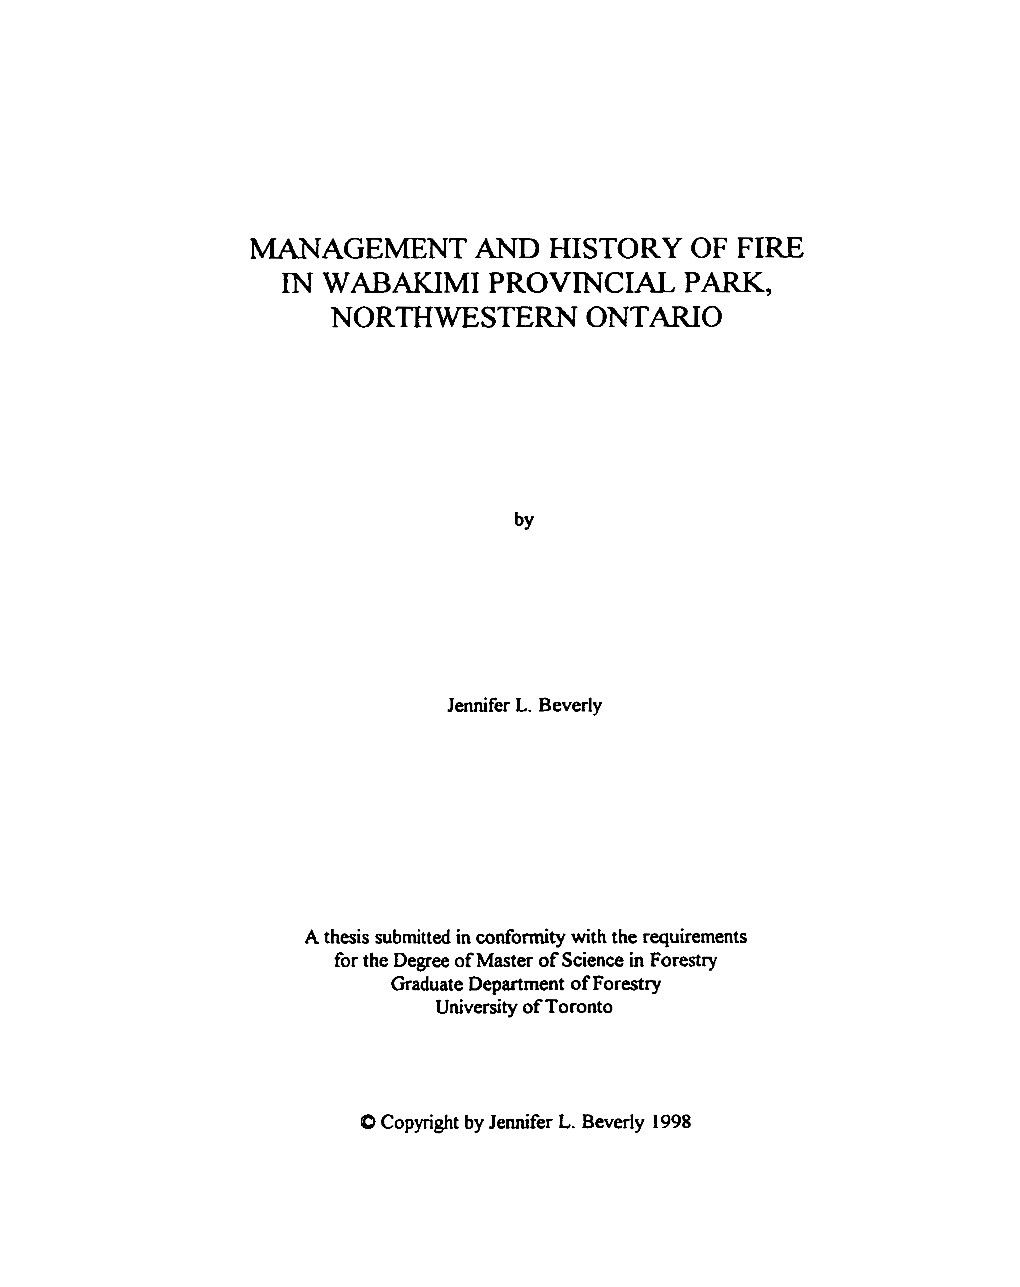 MANAGEMENT and HISTORY of FIRE in WABAKIMI PROVINCIAL PARK, NORTHWESTERN ONTARIO